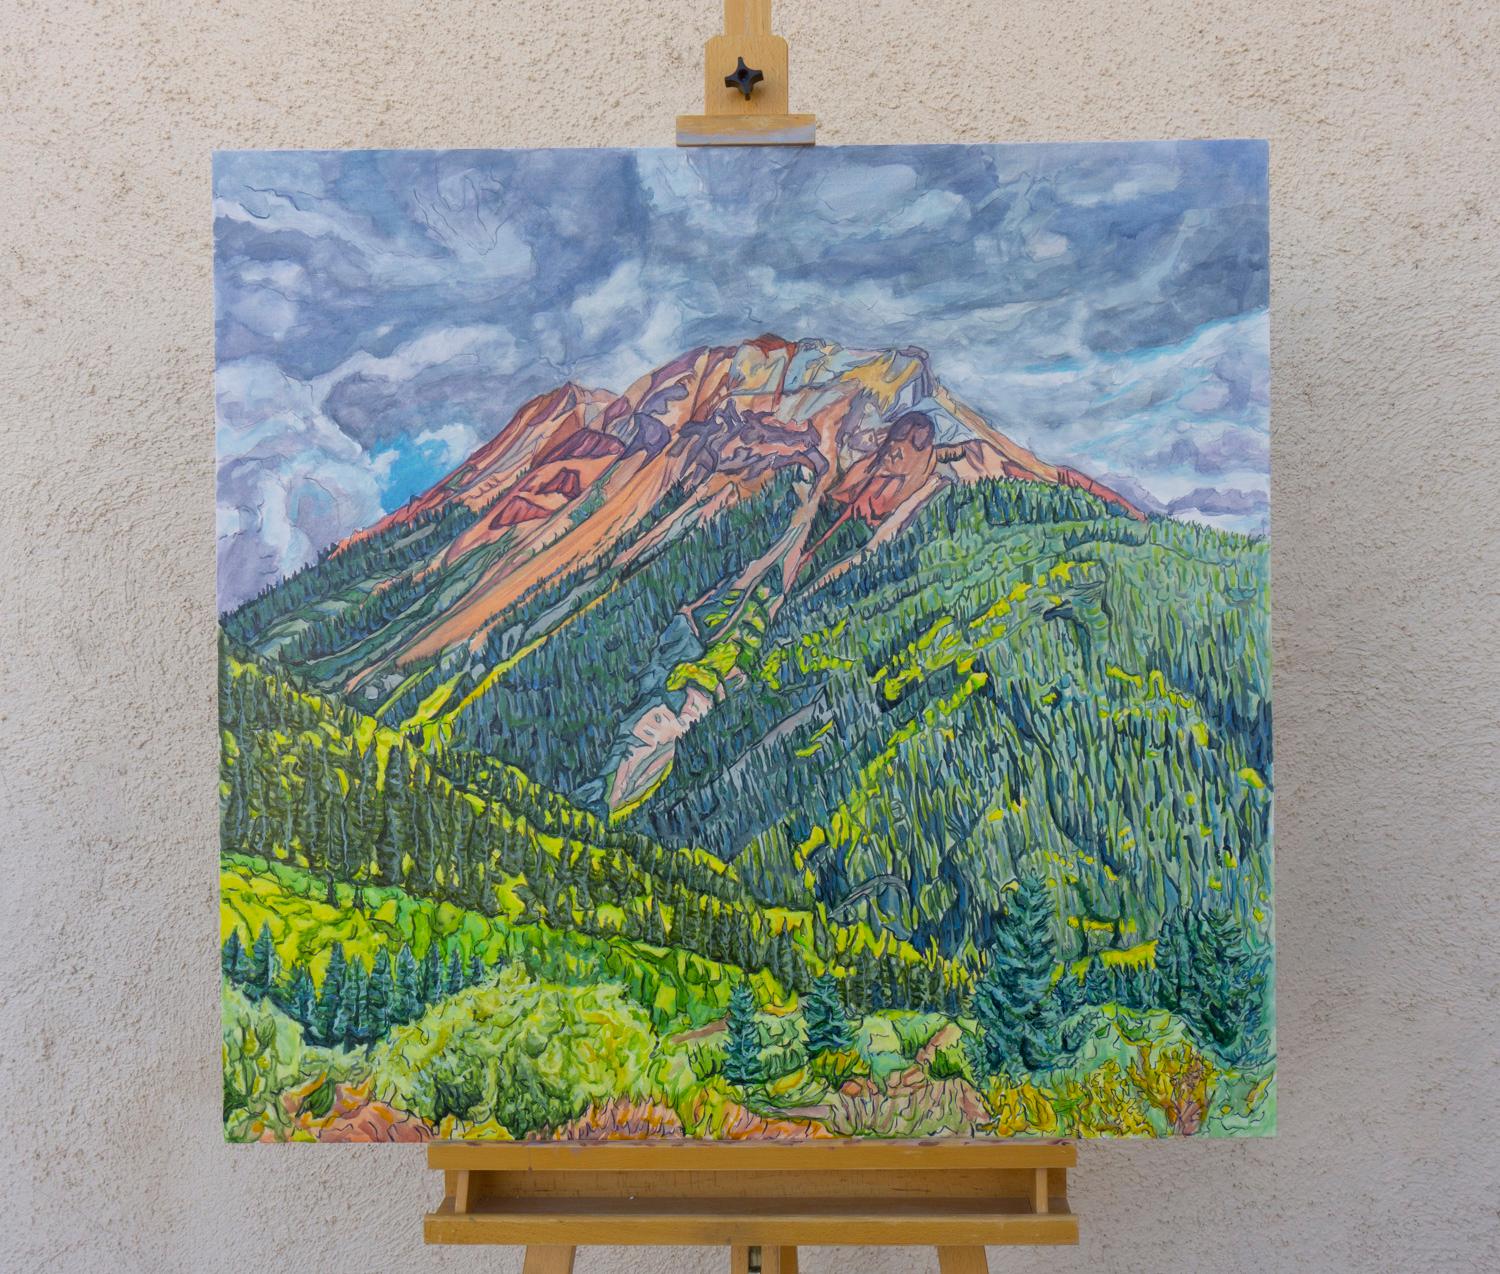 <p>Artist Comments<br>An enthralling view of the Red Mountain Pass during the fall season displays rich hues of greens and yellows. The dark, shifting clouds and turning aspens add a dramatic feel to the towering red summits. This captivating scene